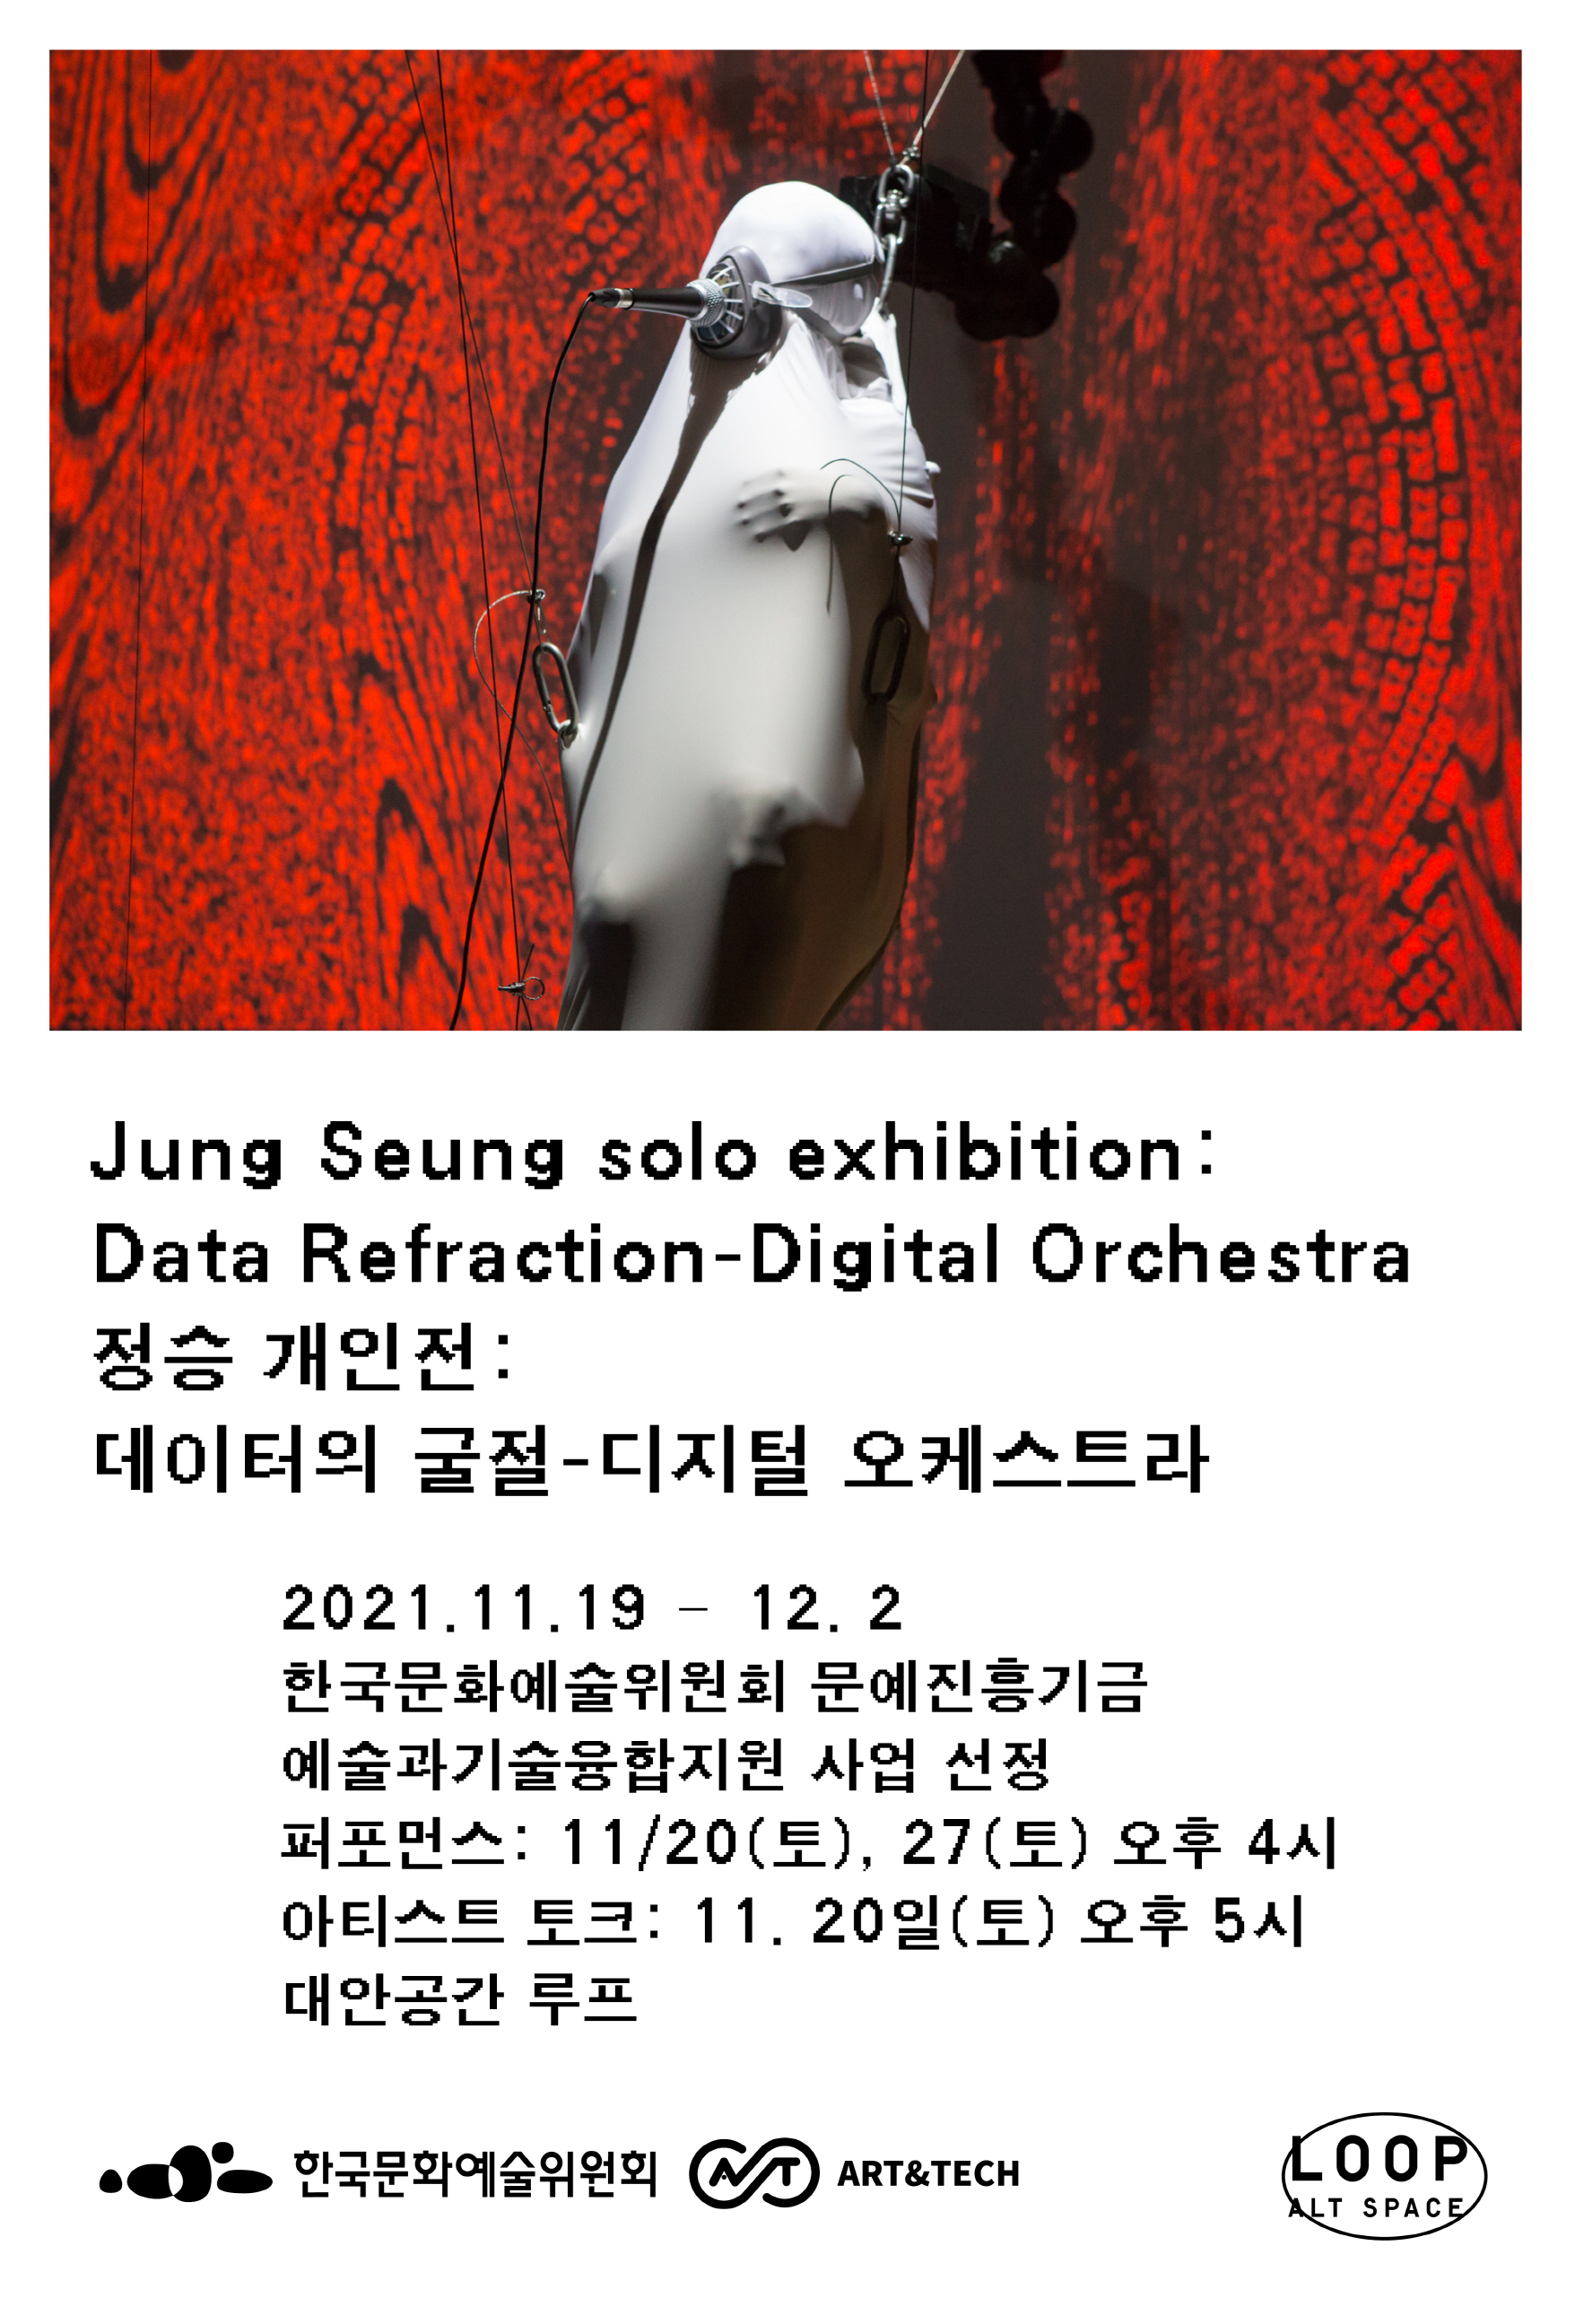 Jung Seung Solo exhibition: Data Refraction- Digital Orchestra